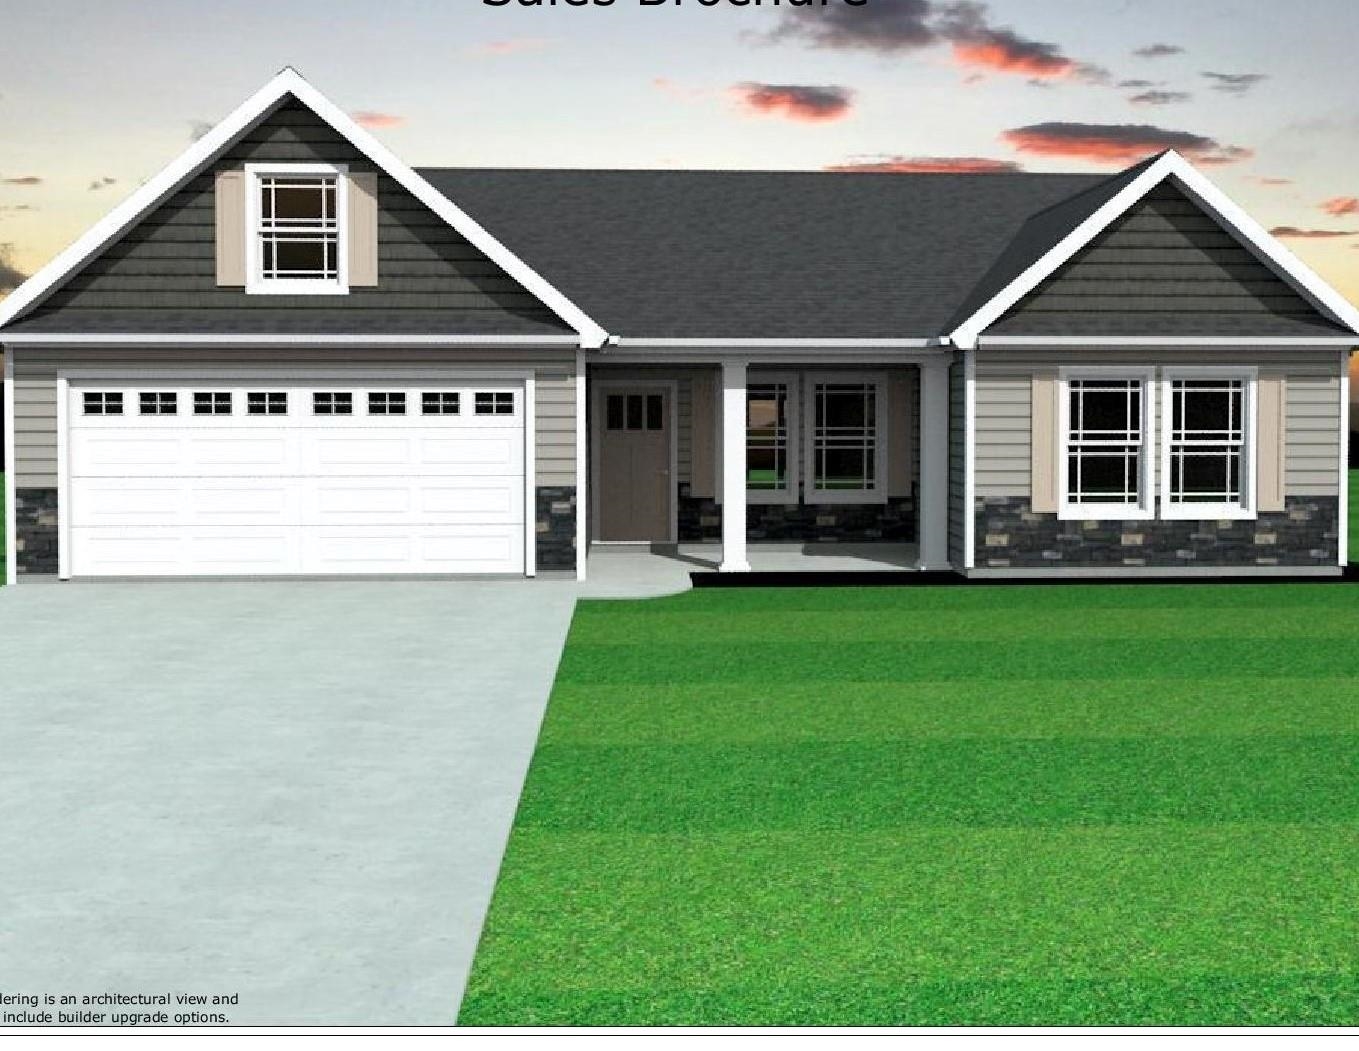 CONSTRUCTION BEGINNING SOON! STARTEX floorplan. 3 bedrooms, 2 full bathrooms, vinyl flooring in common areas, upgraded painted cabinets, trey ceiling with rope lighting in master bedroom. Located in the NEW Elliott park community in Lyman just minutes from Spartanburg and Greenville. Call today for more info!